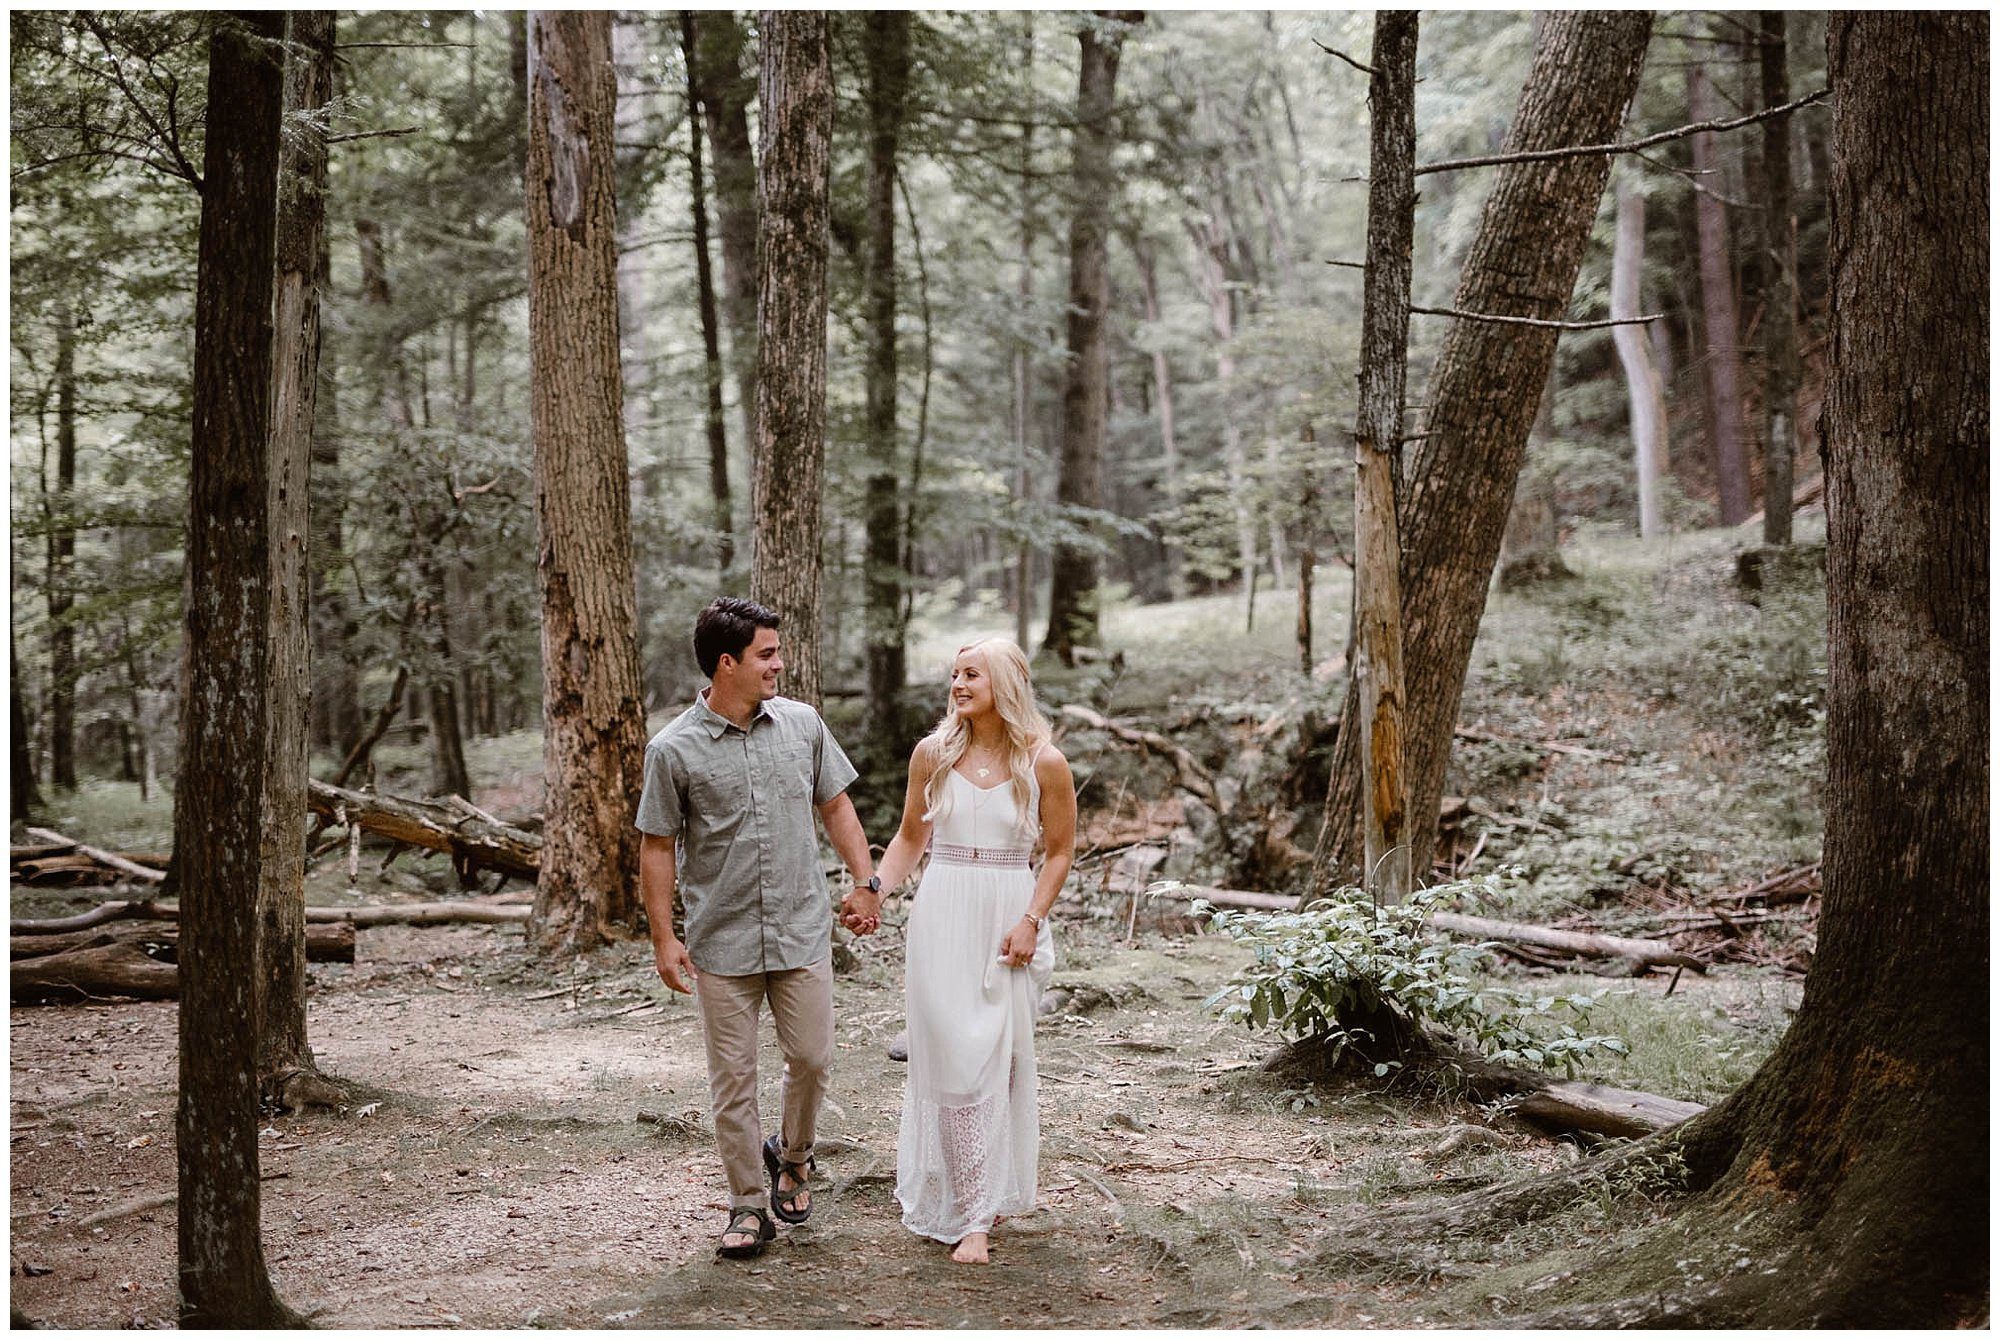 Engagement photos in Cades Cove Smokies